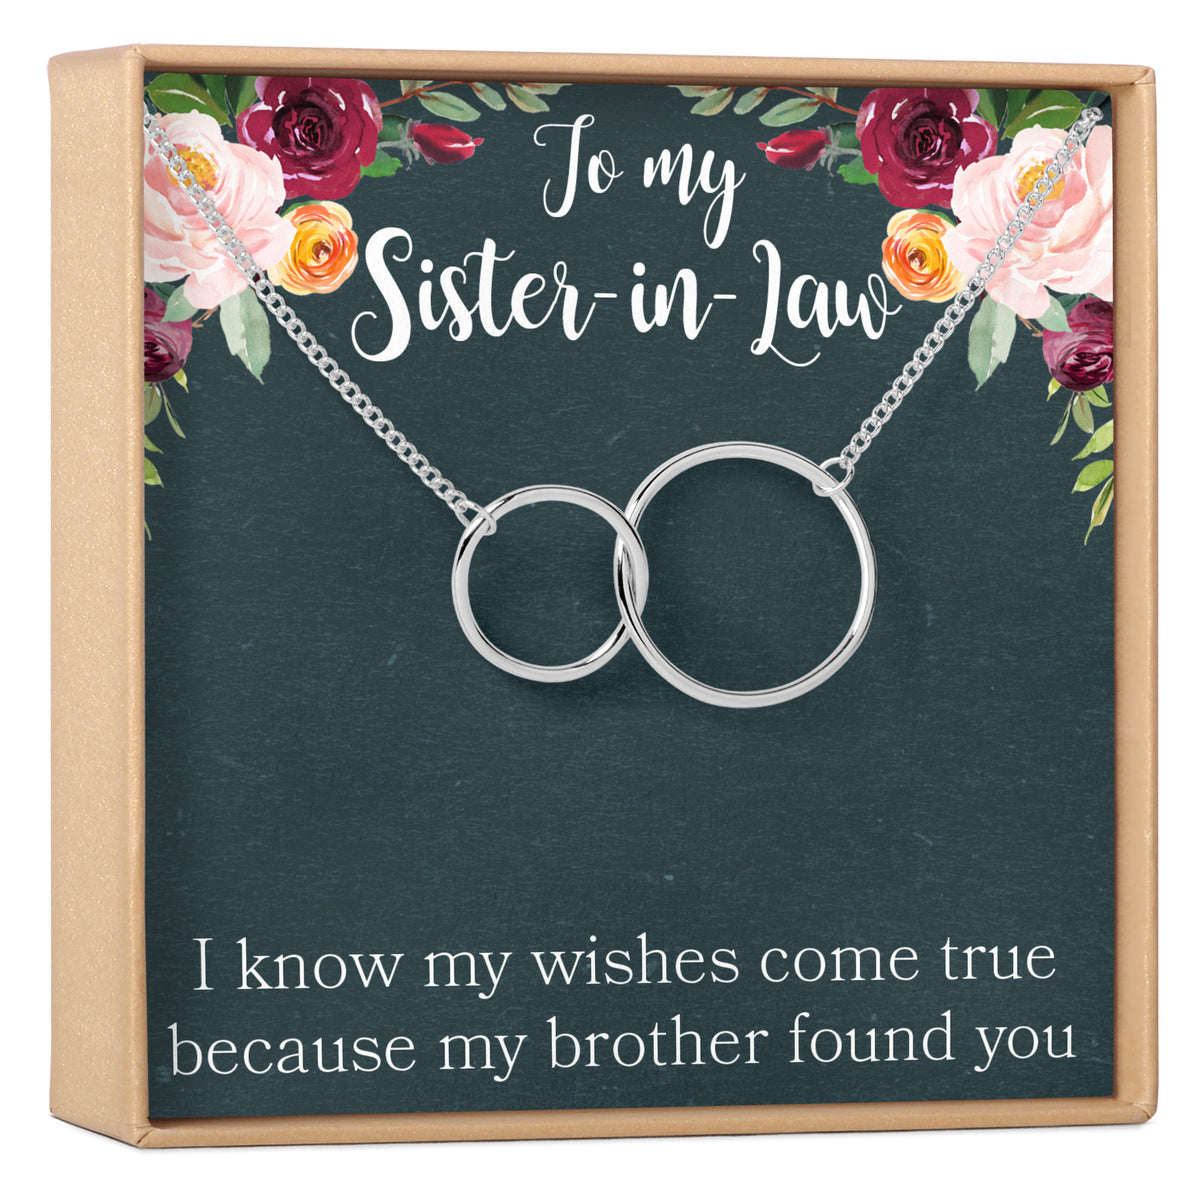 Sister-In-Law Necklace - Dear Ava, Jewelry / Necklaces / Pendants